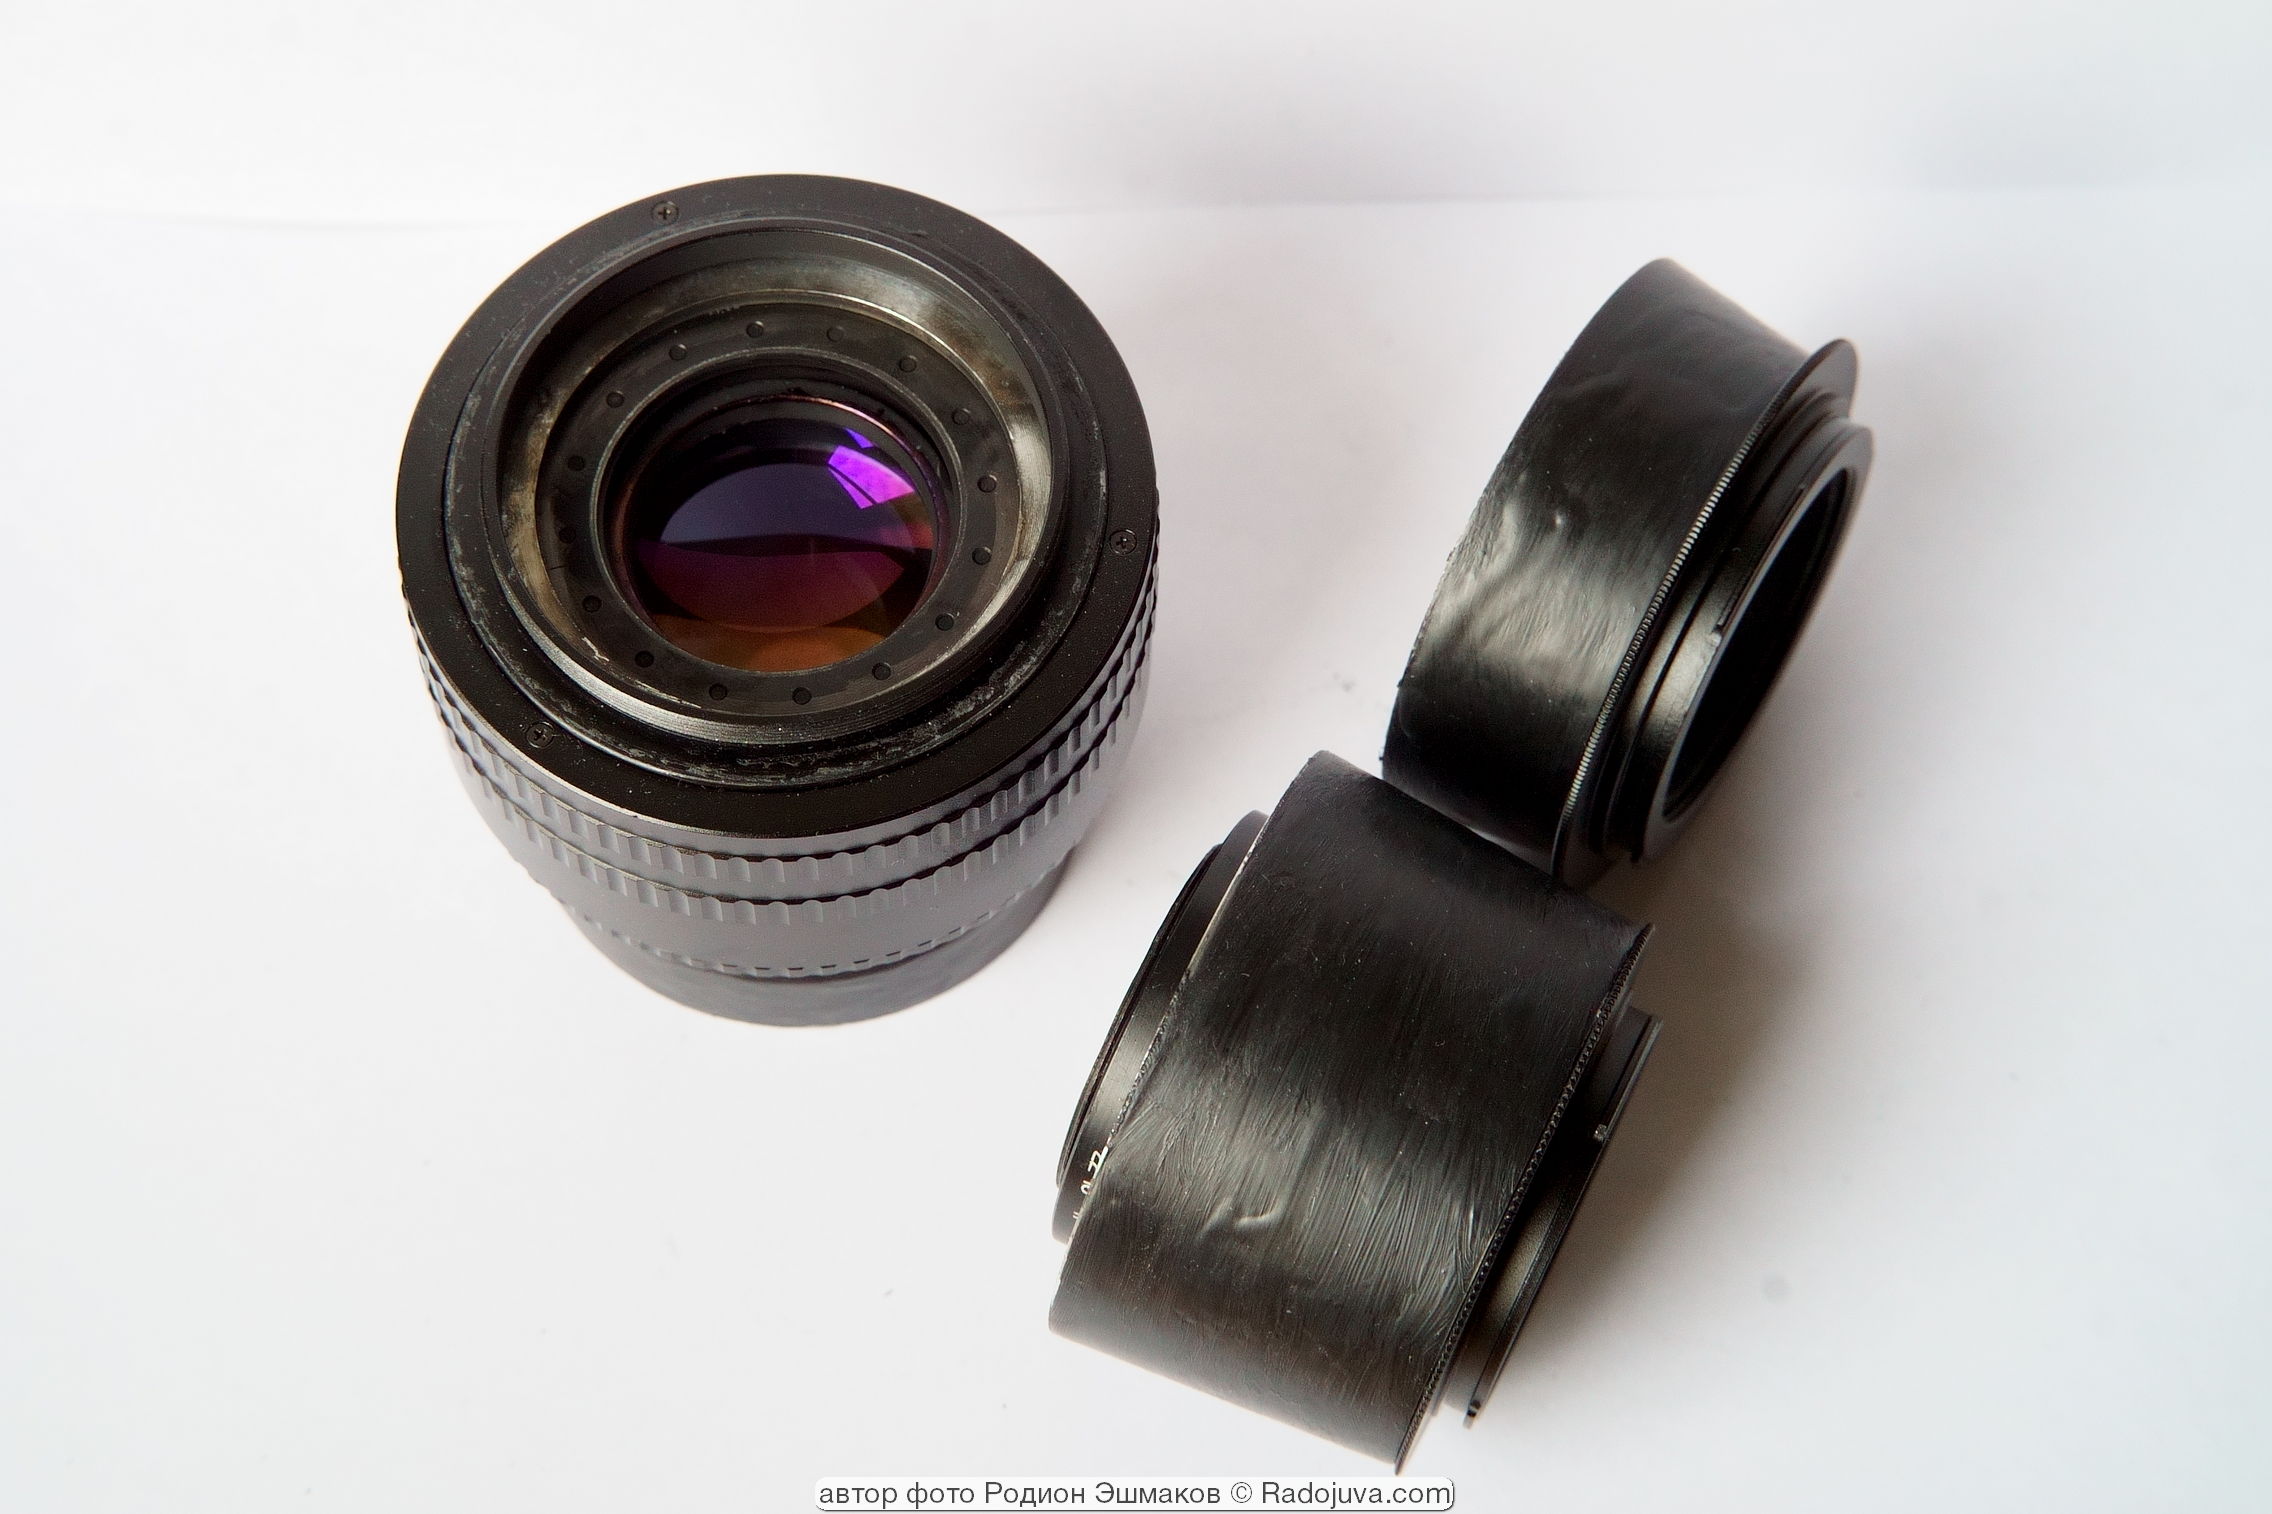 Triplet-5 lens and interchangeable shanks: with M42 thread and 0.7x speed booster with Sony E mount.